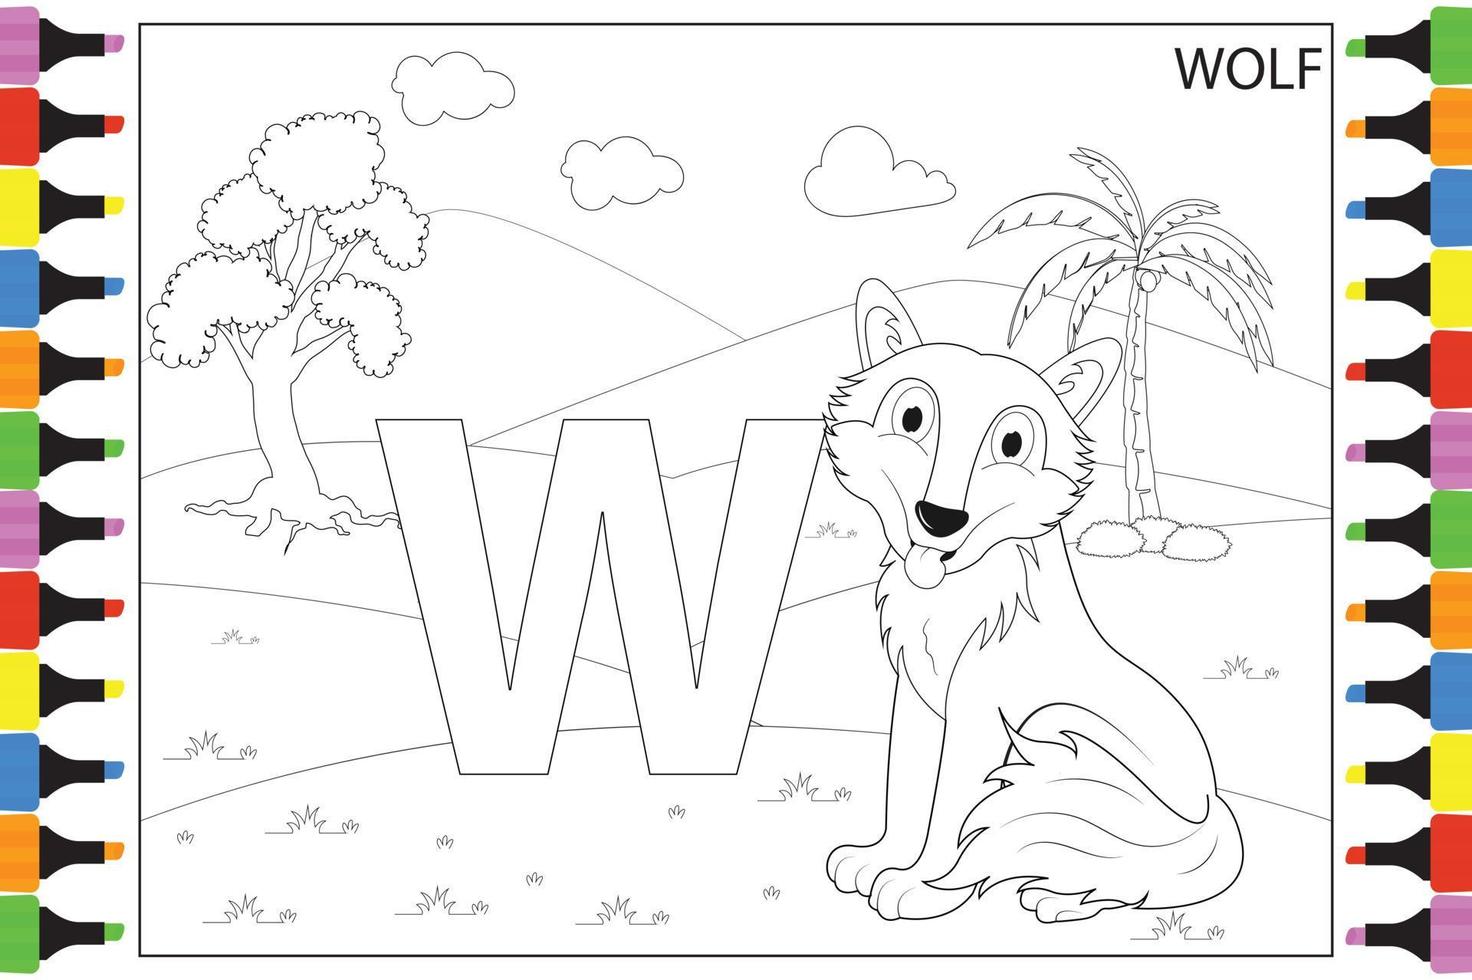 coloring Wolf animal cartoon for kids vector